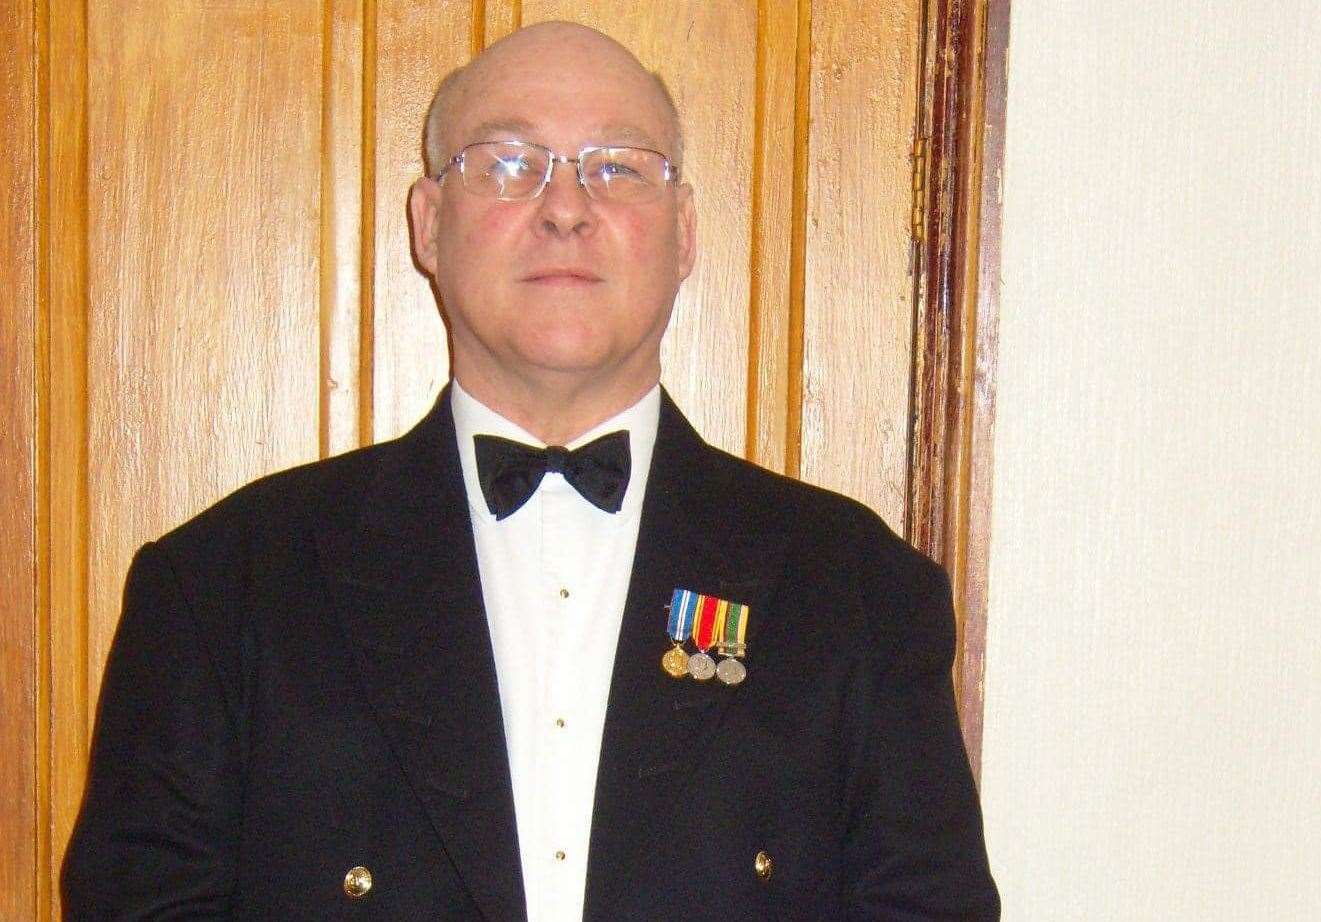 Peter Jones, from Minster, 'made such a difference to people's lives'. Picture: Sheppey Sea Cadets